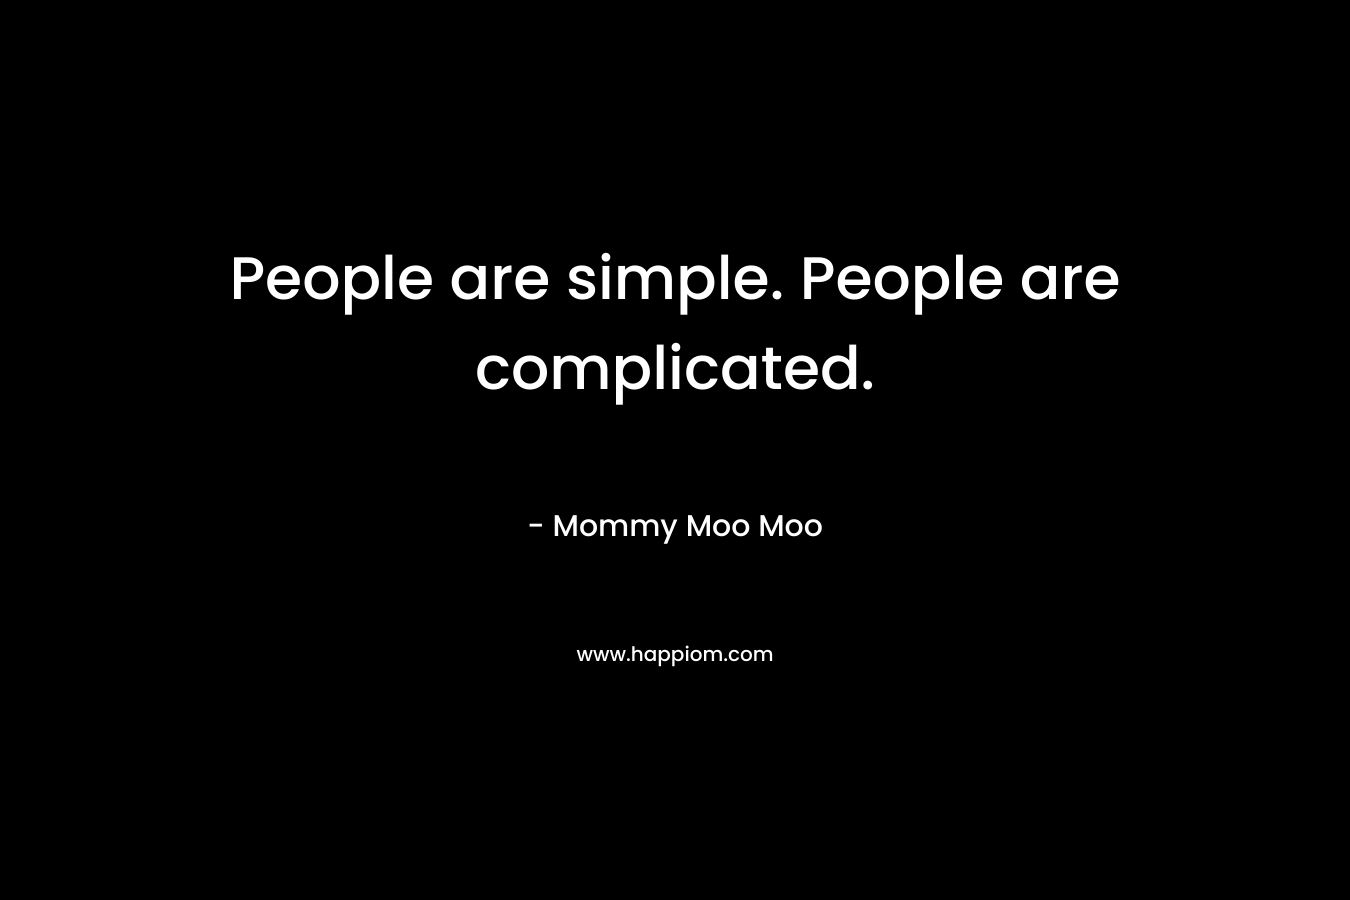 People are simple. People are complicated. – Mommy Moo Moo